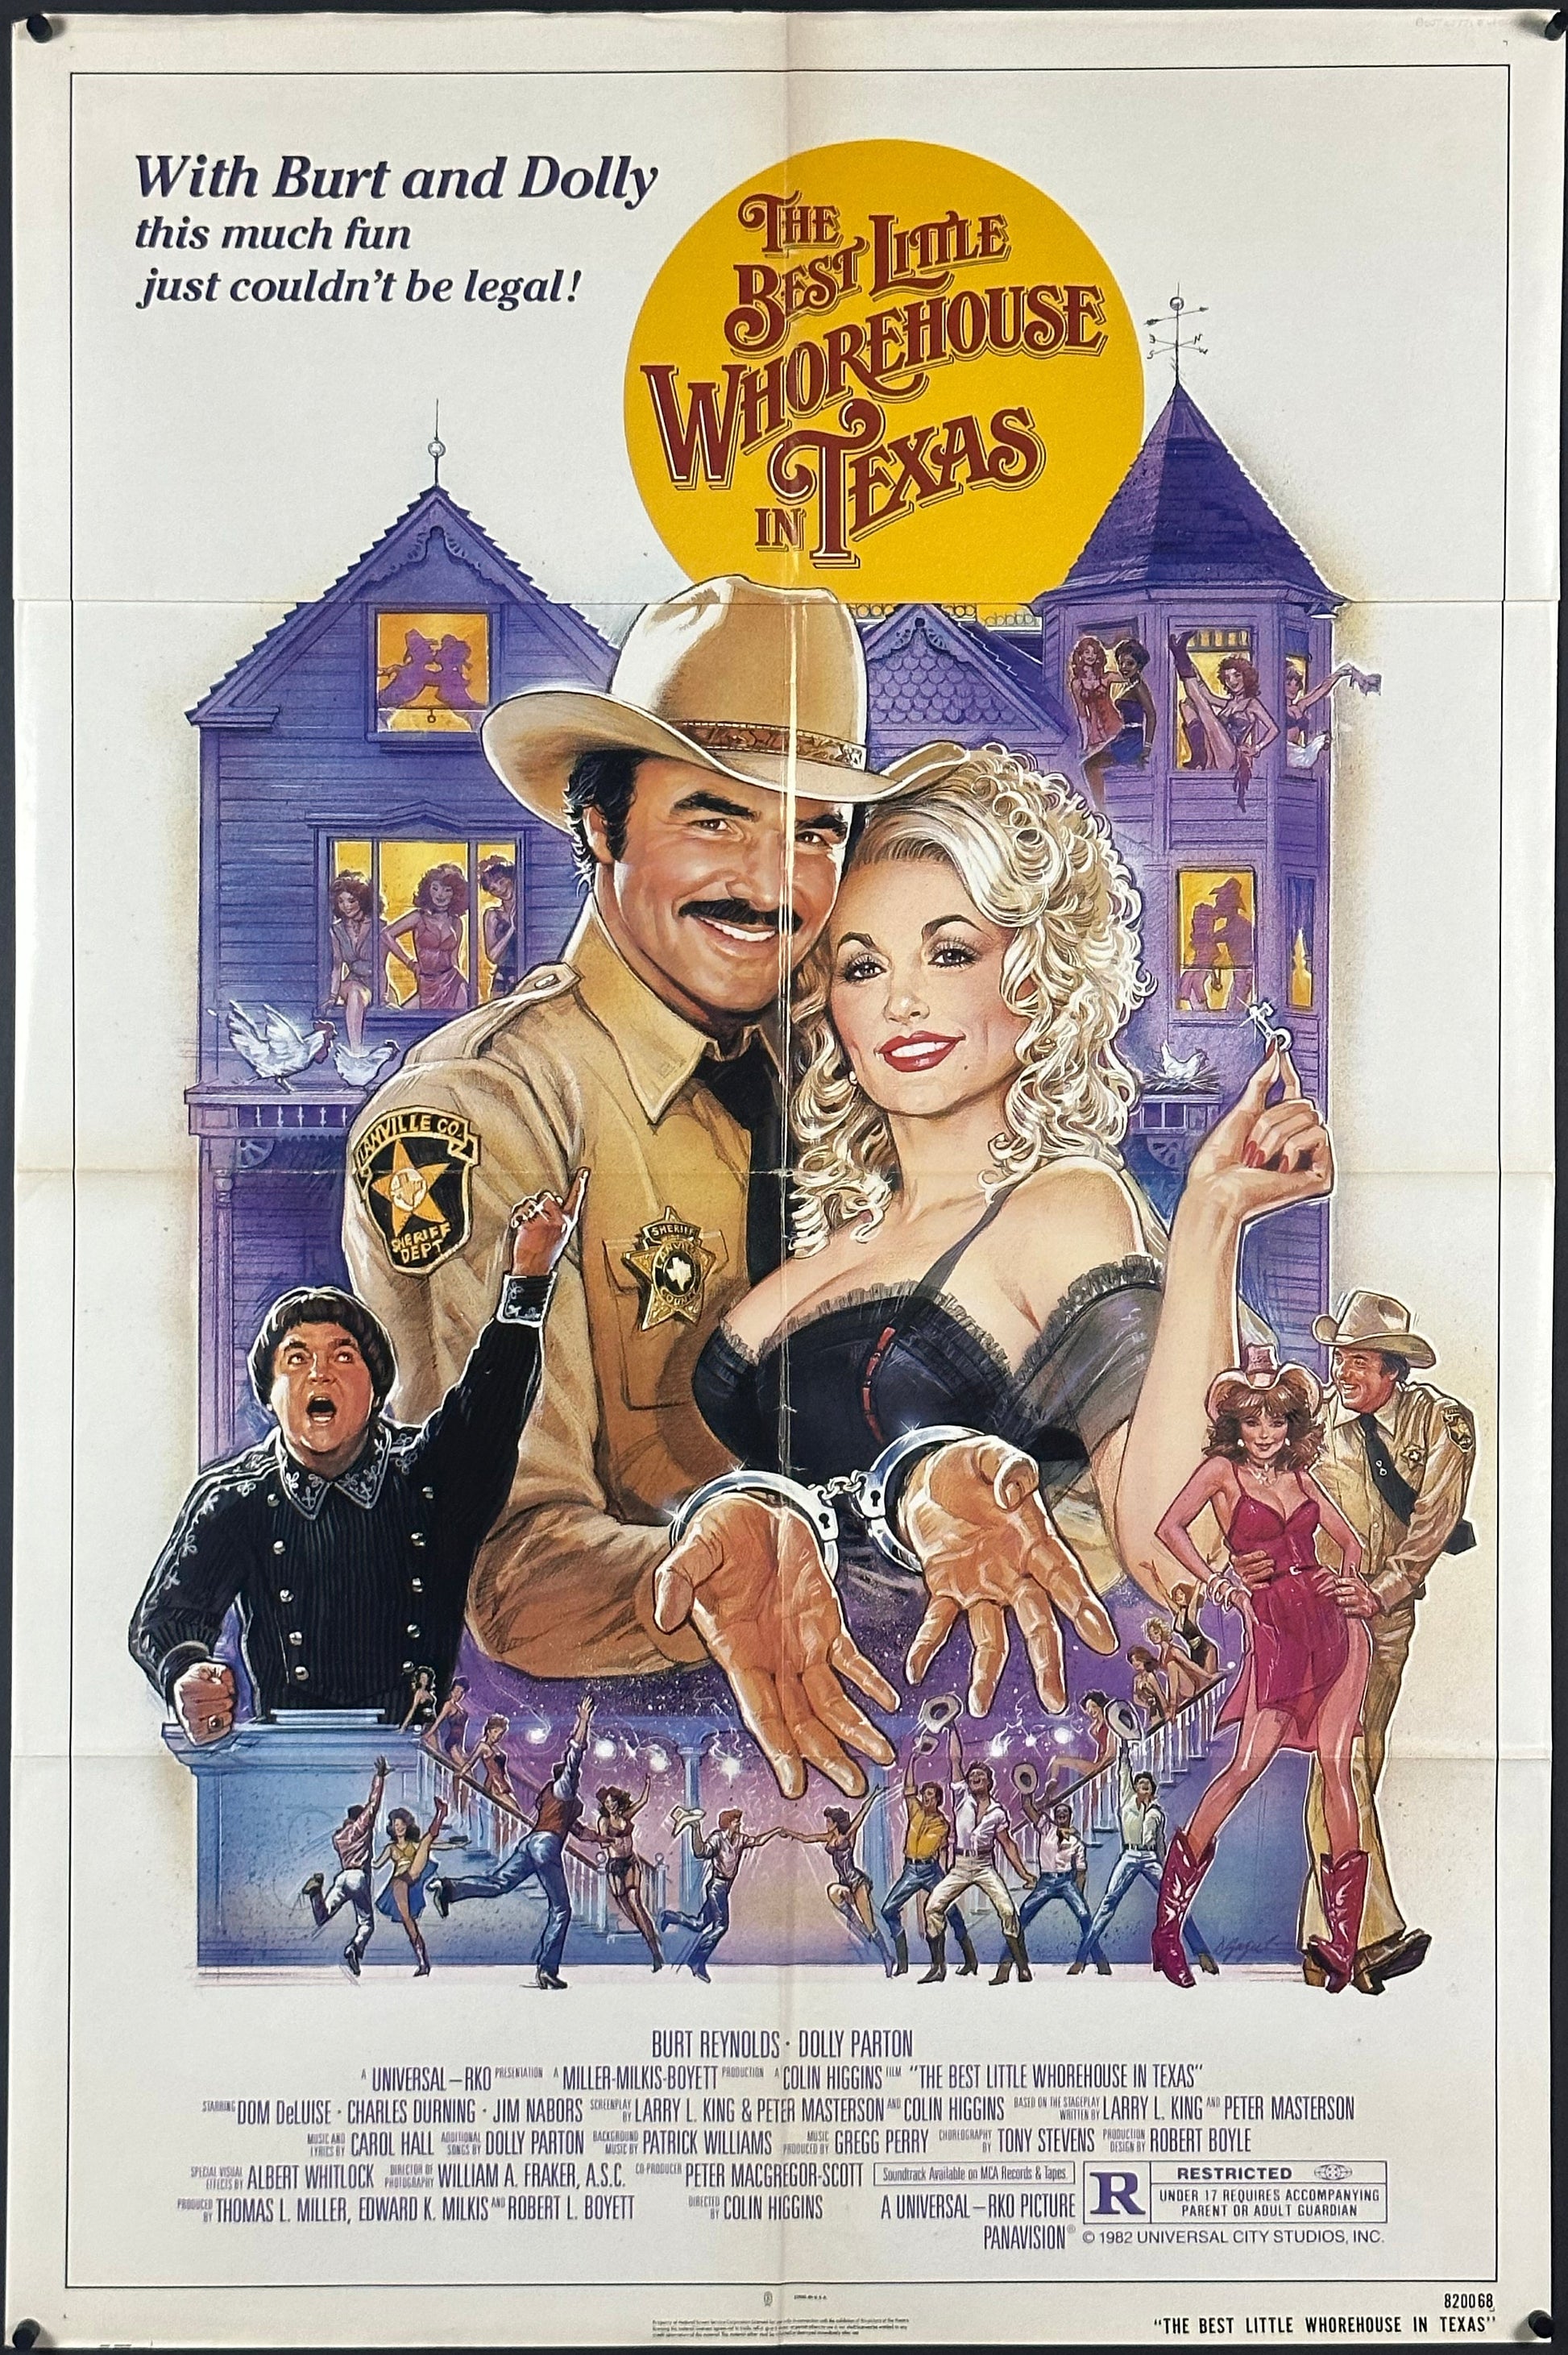 The Best Little Whorehouse In Texas - posterpalace.com